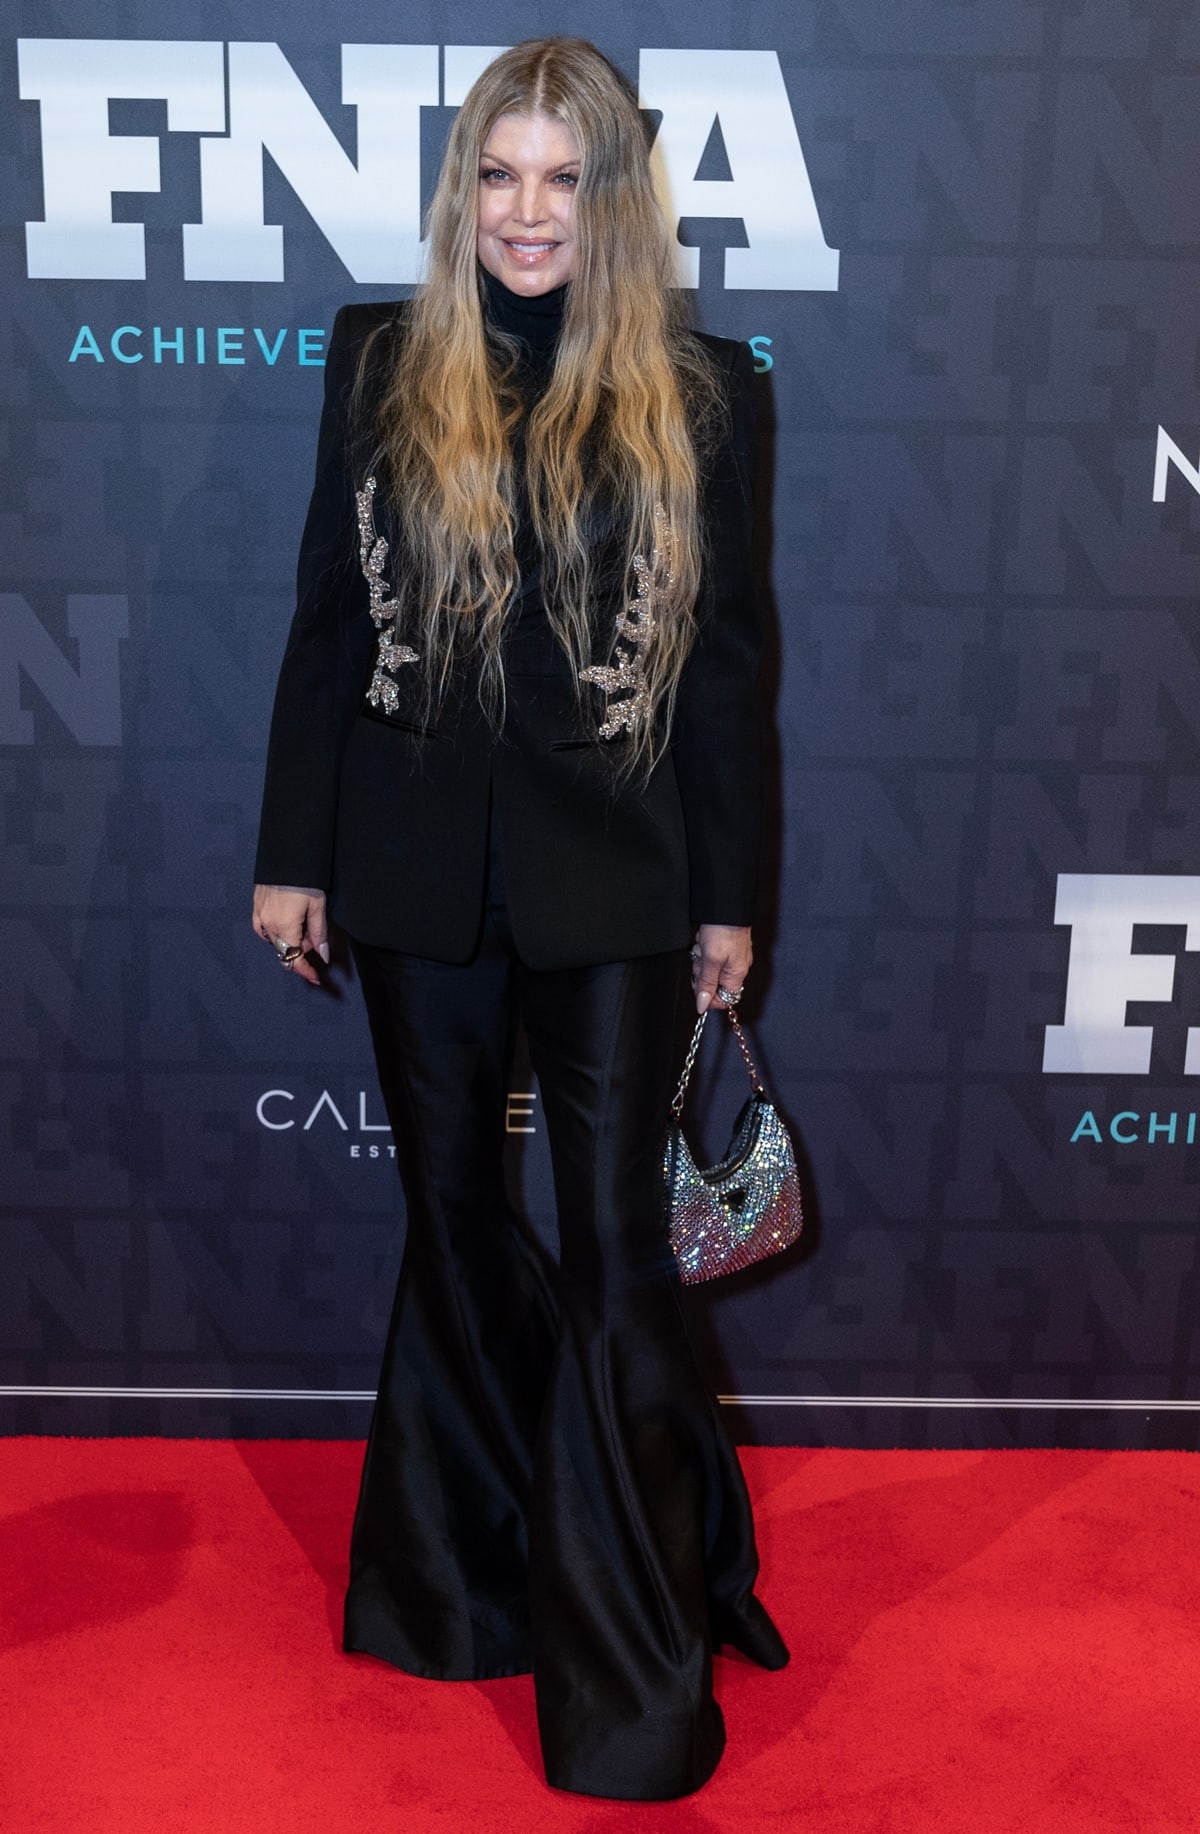 Stacy Ferguson, standing at 5 feet 2 ½ inches (158.8 cm), graced the 2022 Footwear News Achievement Awards held at Cipriani South Street in New York City on November 30, 2022